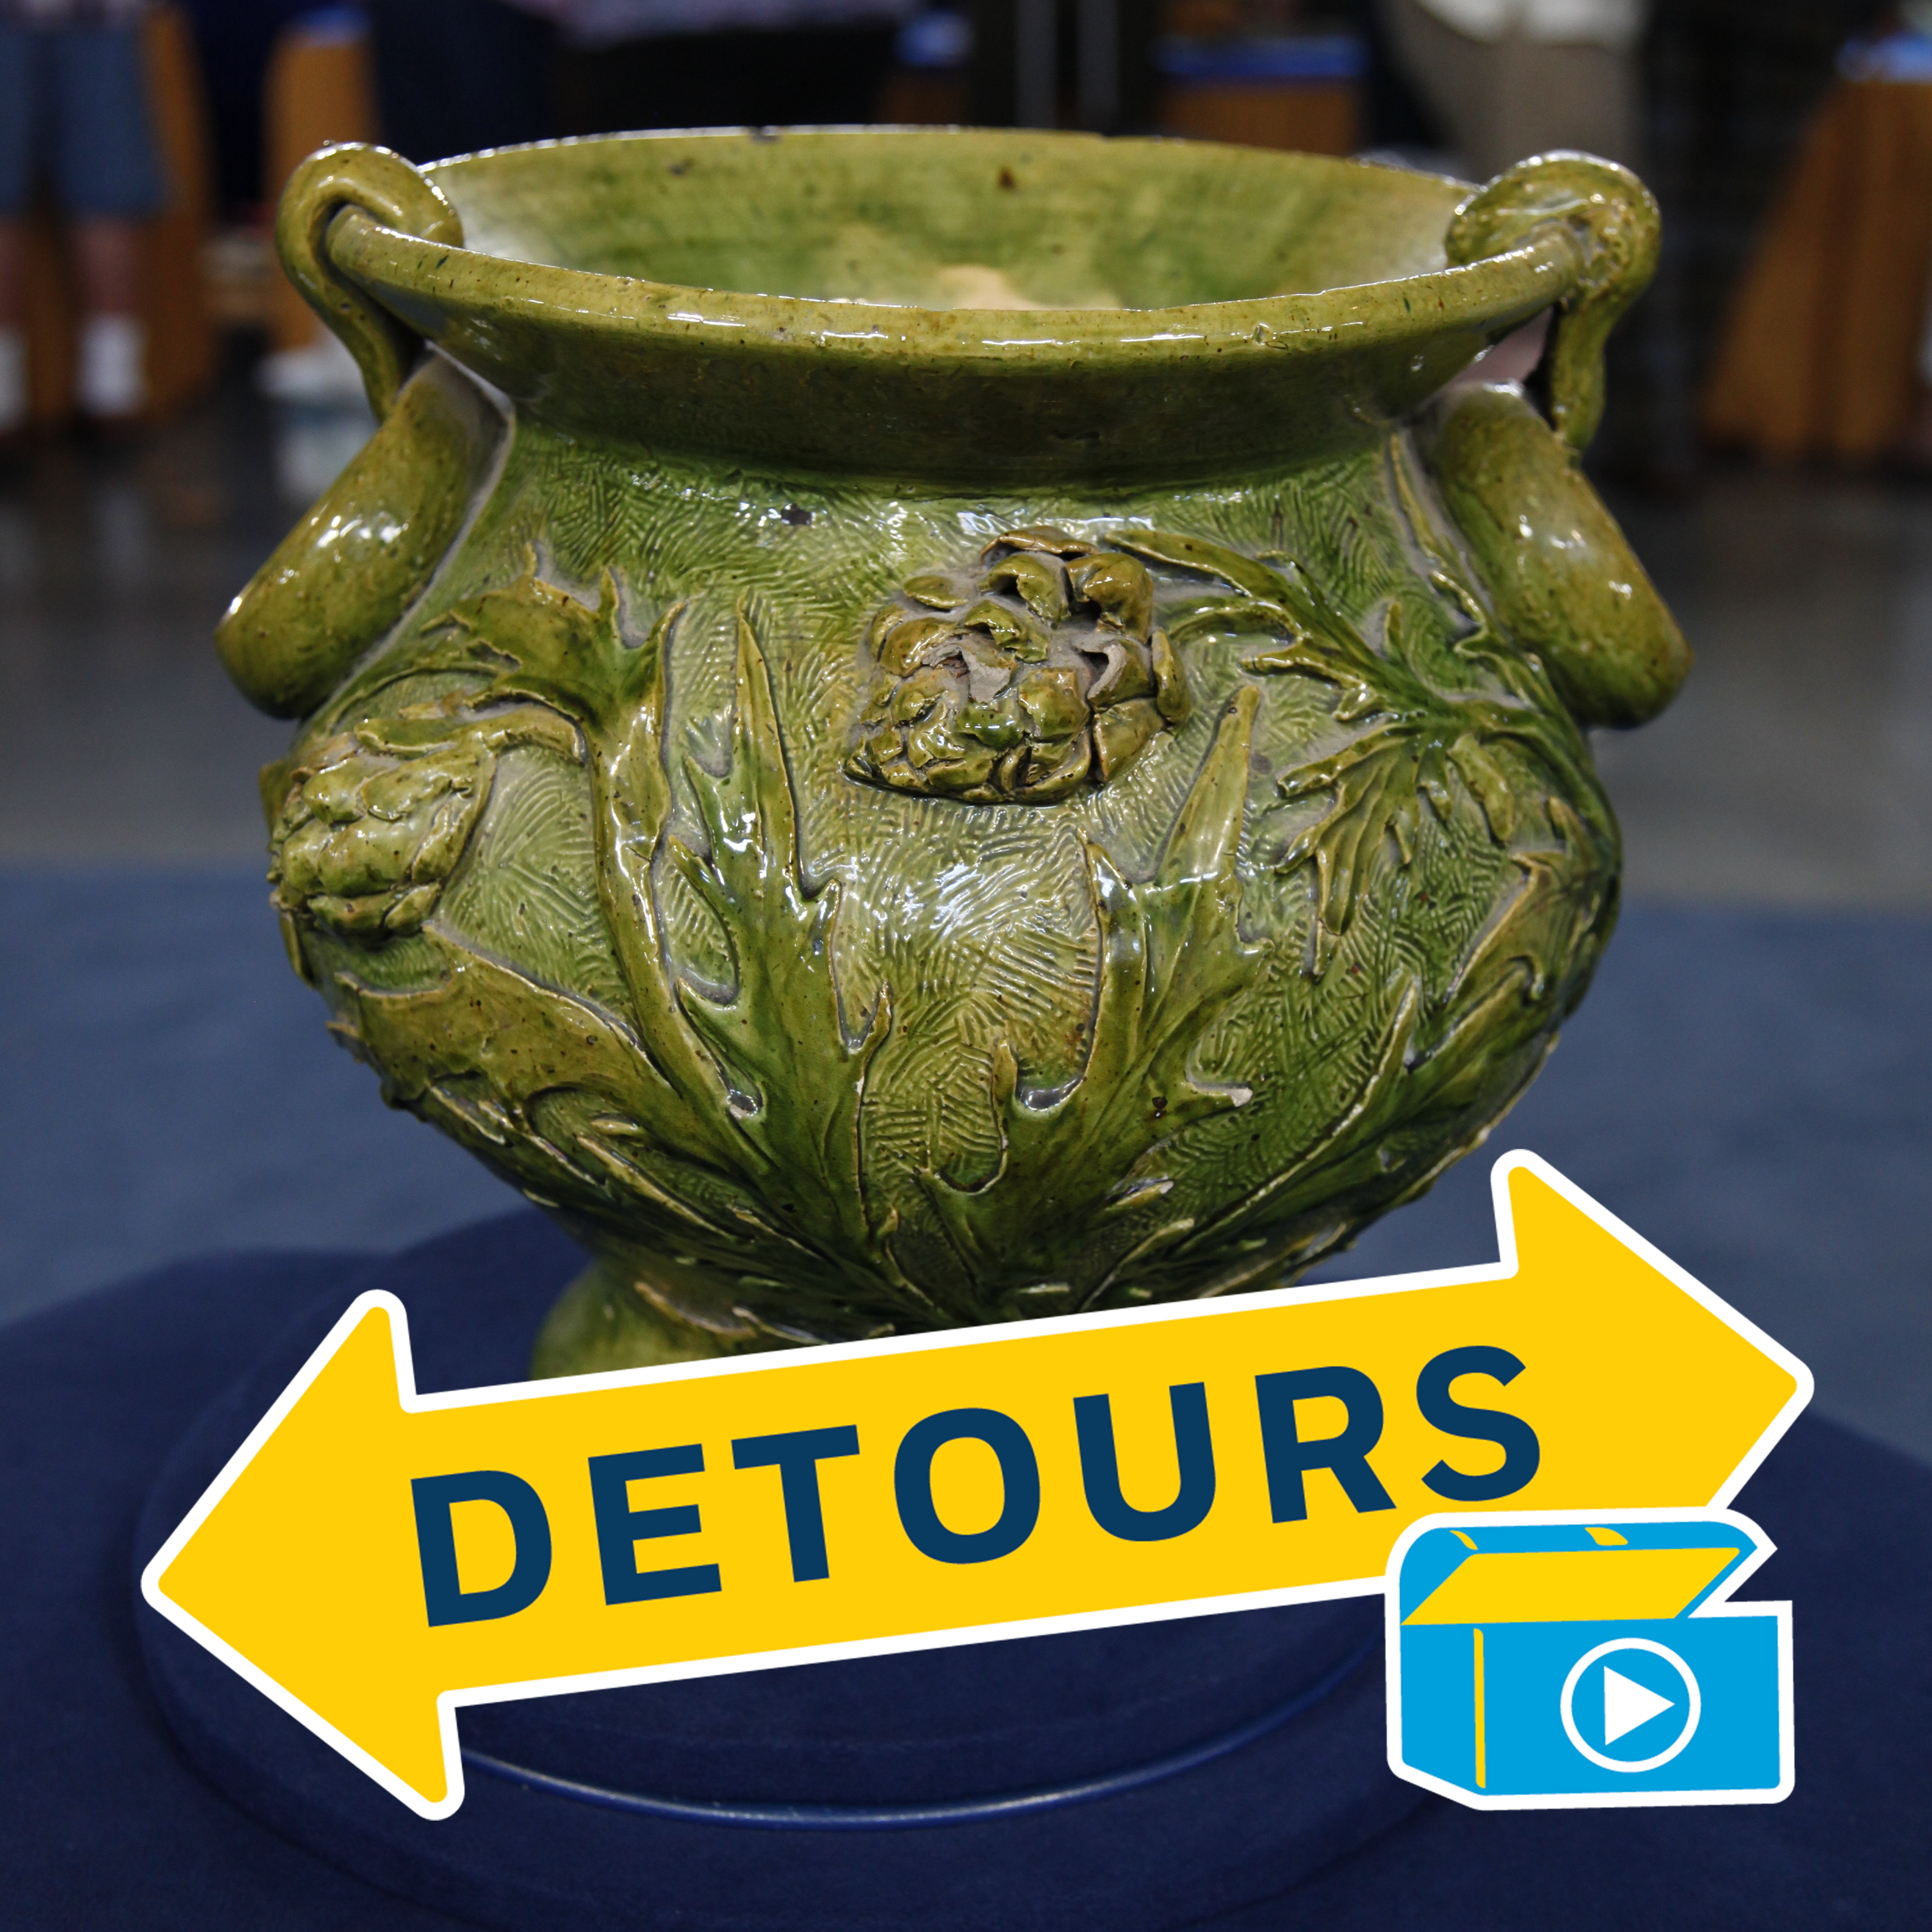 Theresa's Choice – When an inherited piece of New Orleans Art Pottery is appraised for thousands, does it still pay to keep it in the family?